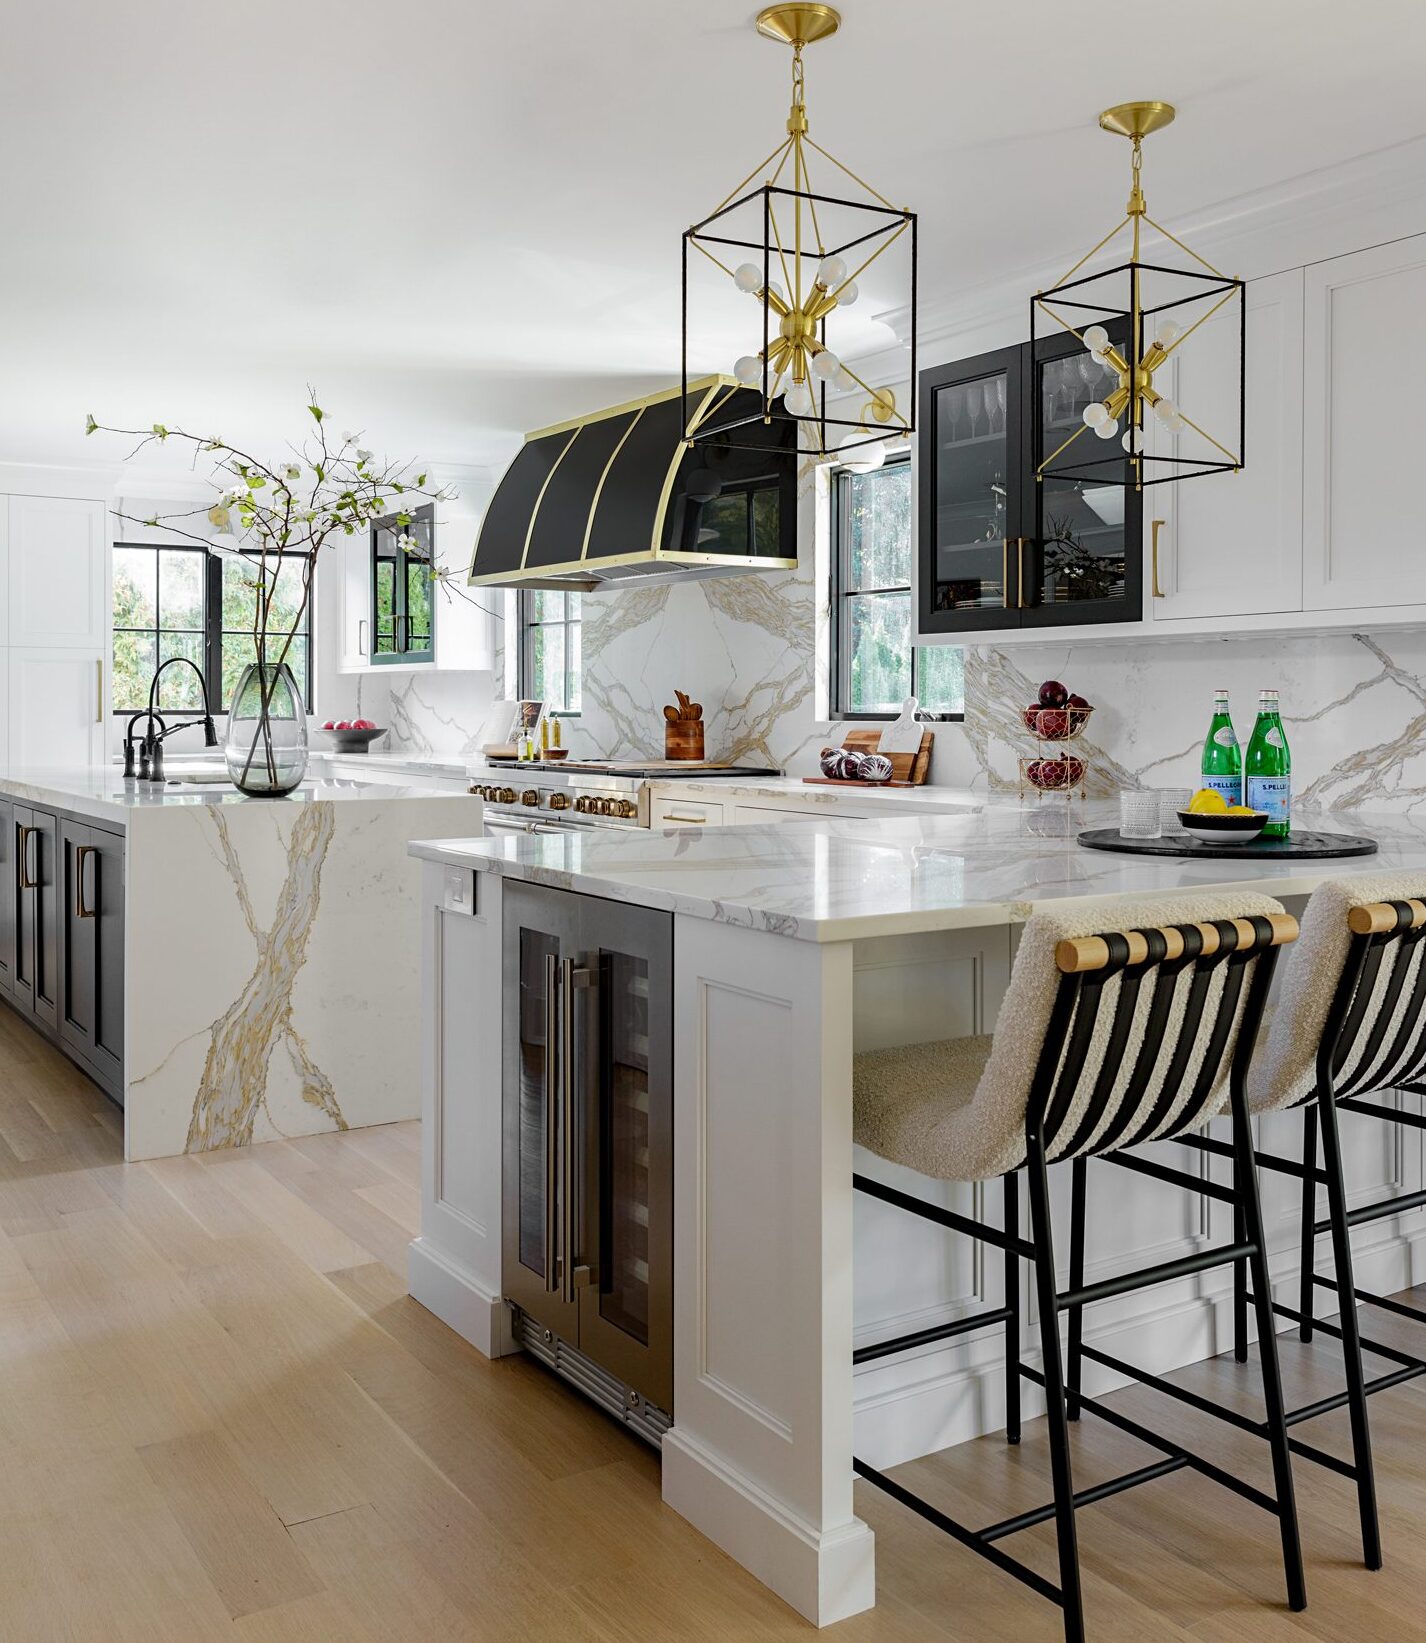 Kitchen peninsula with beverage refrigerator and island with waterfall edge, black and white cabinetry and large black and gold hood over the range